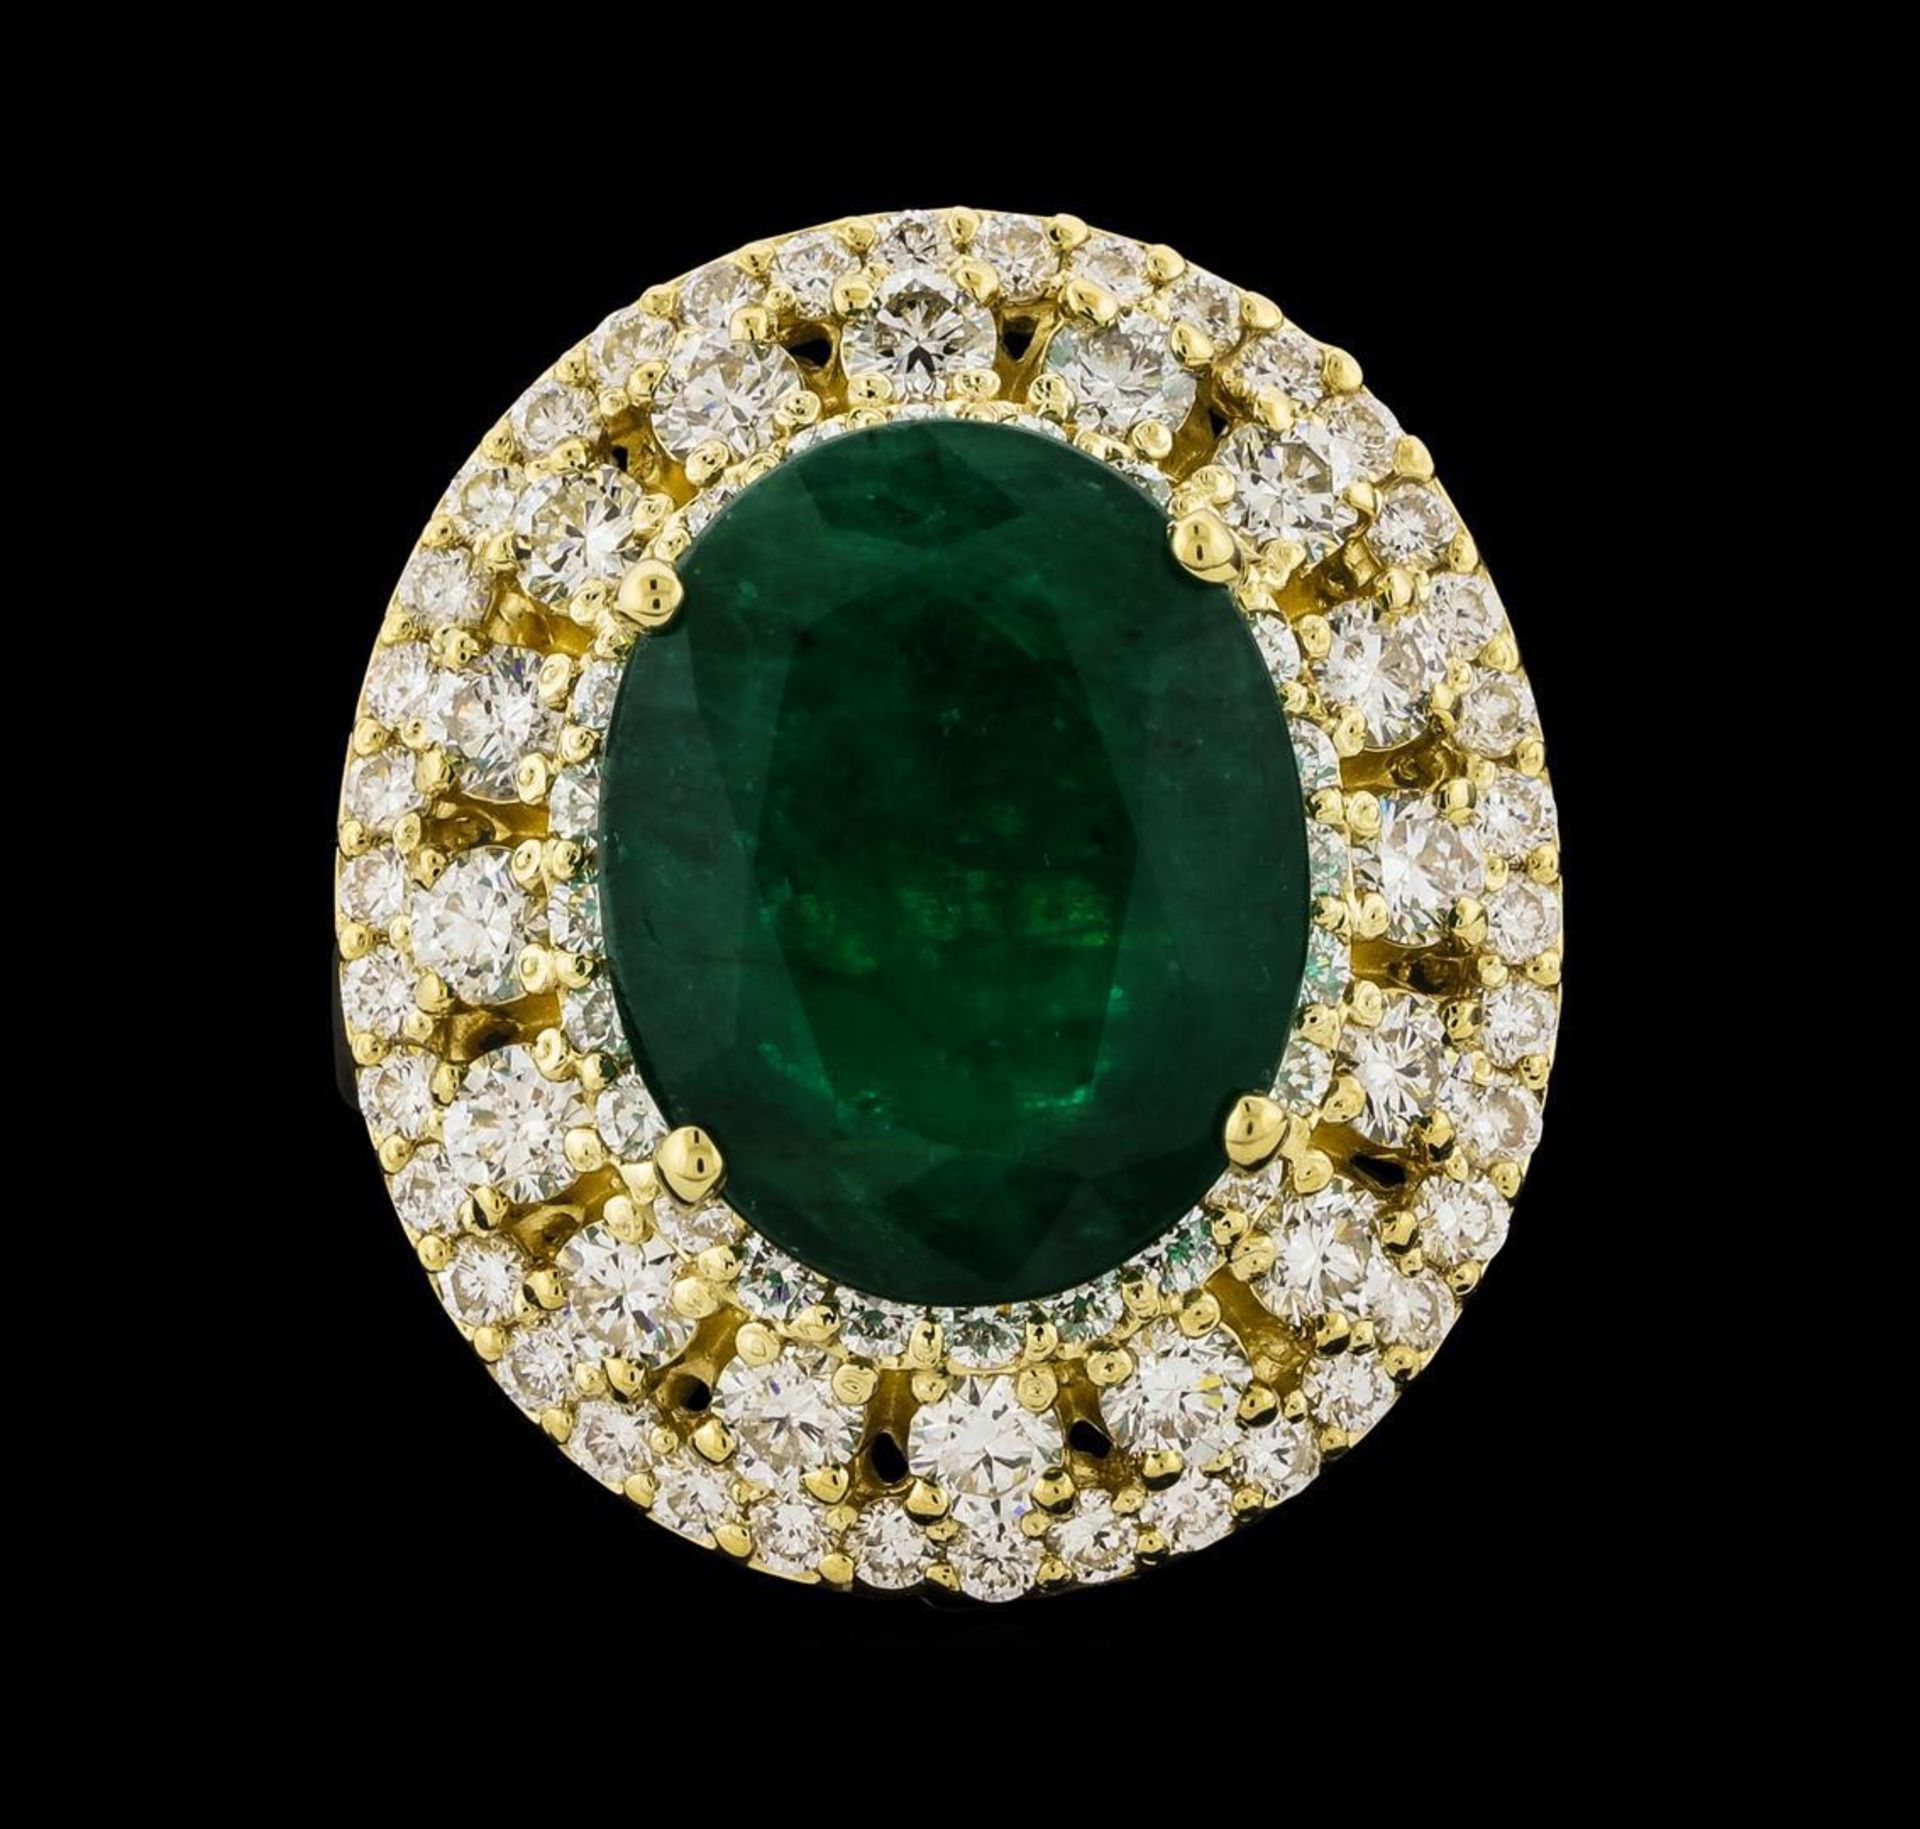 6.63 ctw Emerald and Diamond Ring - 14KT Yellow Gold - Image 2 of 5